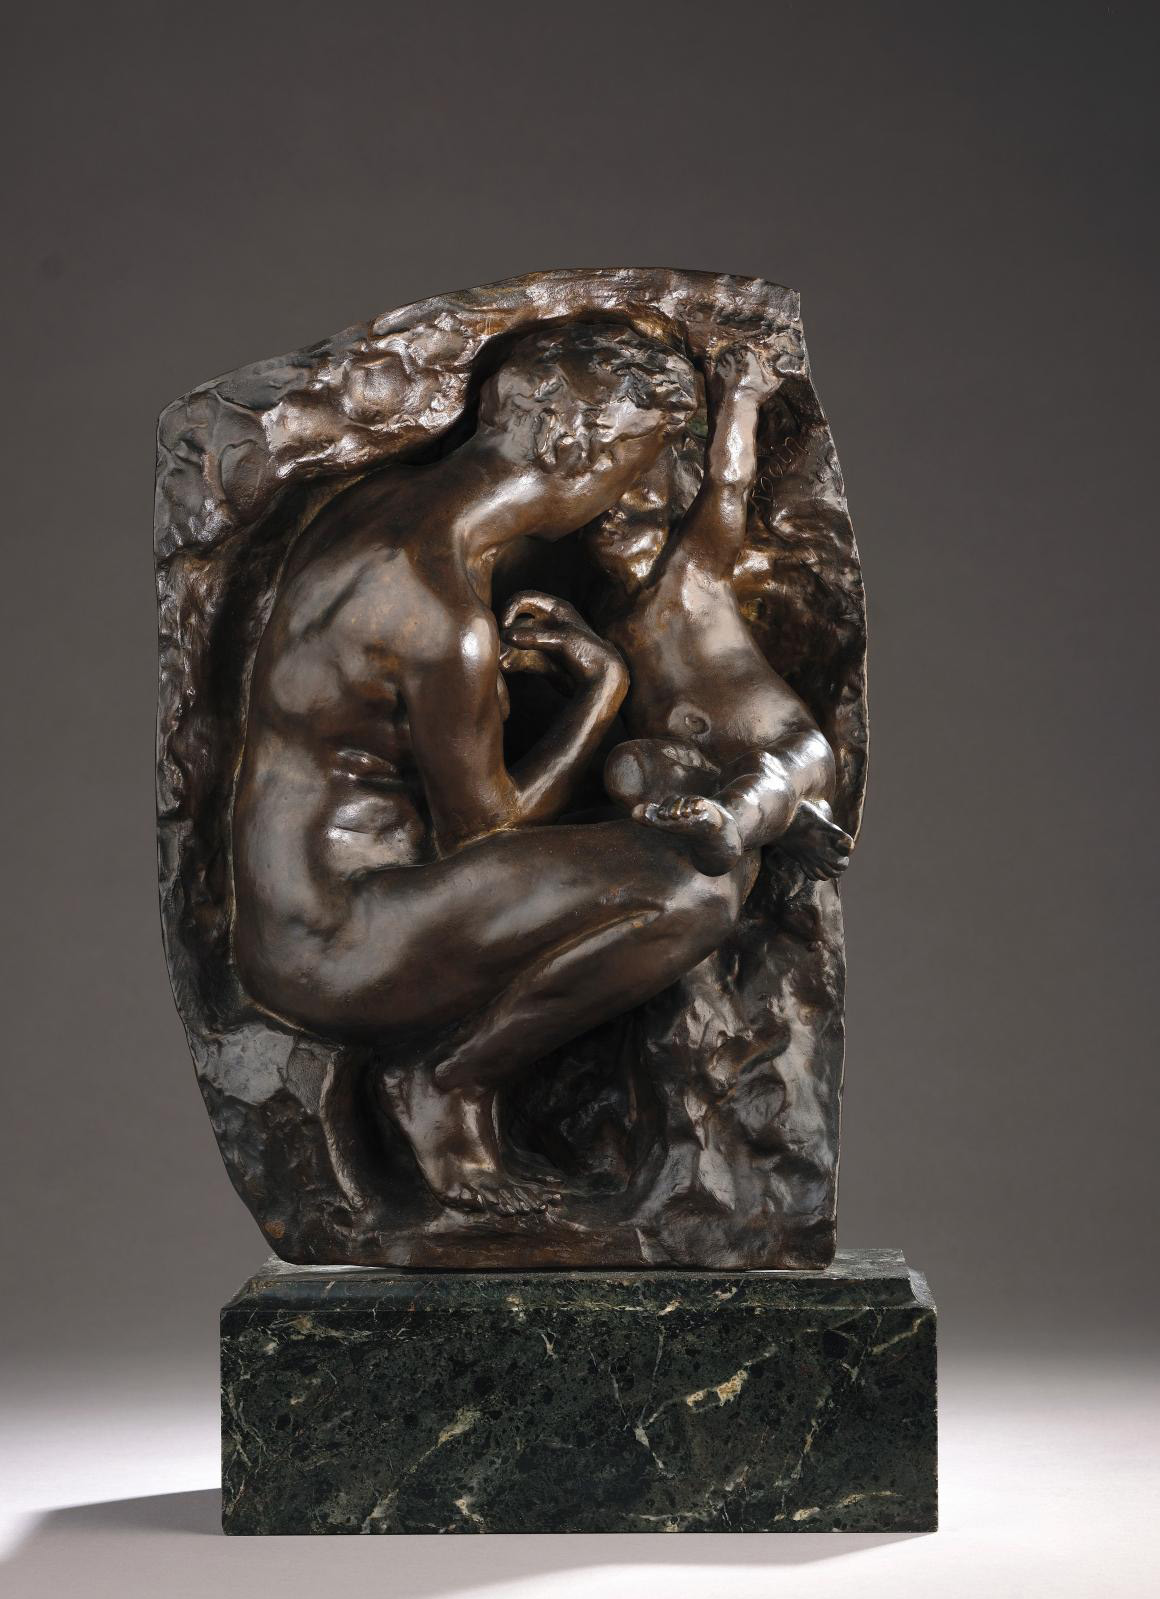 Motherly Love According to Auguste Rodin